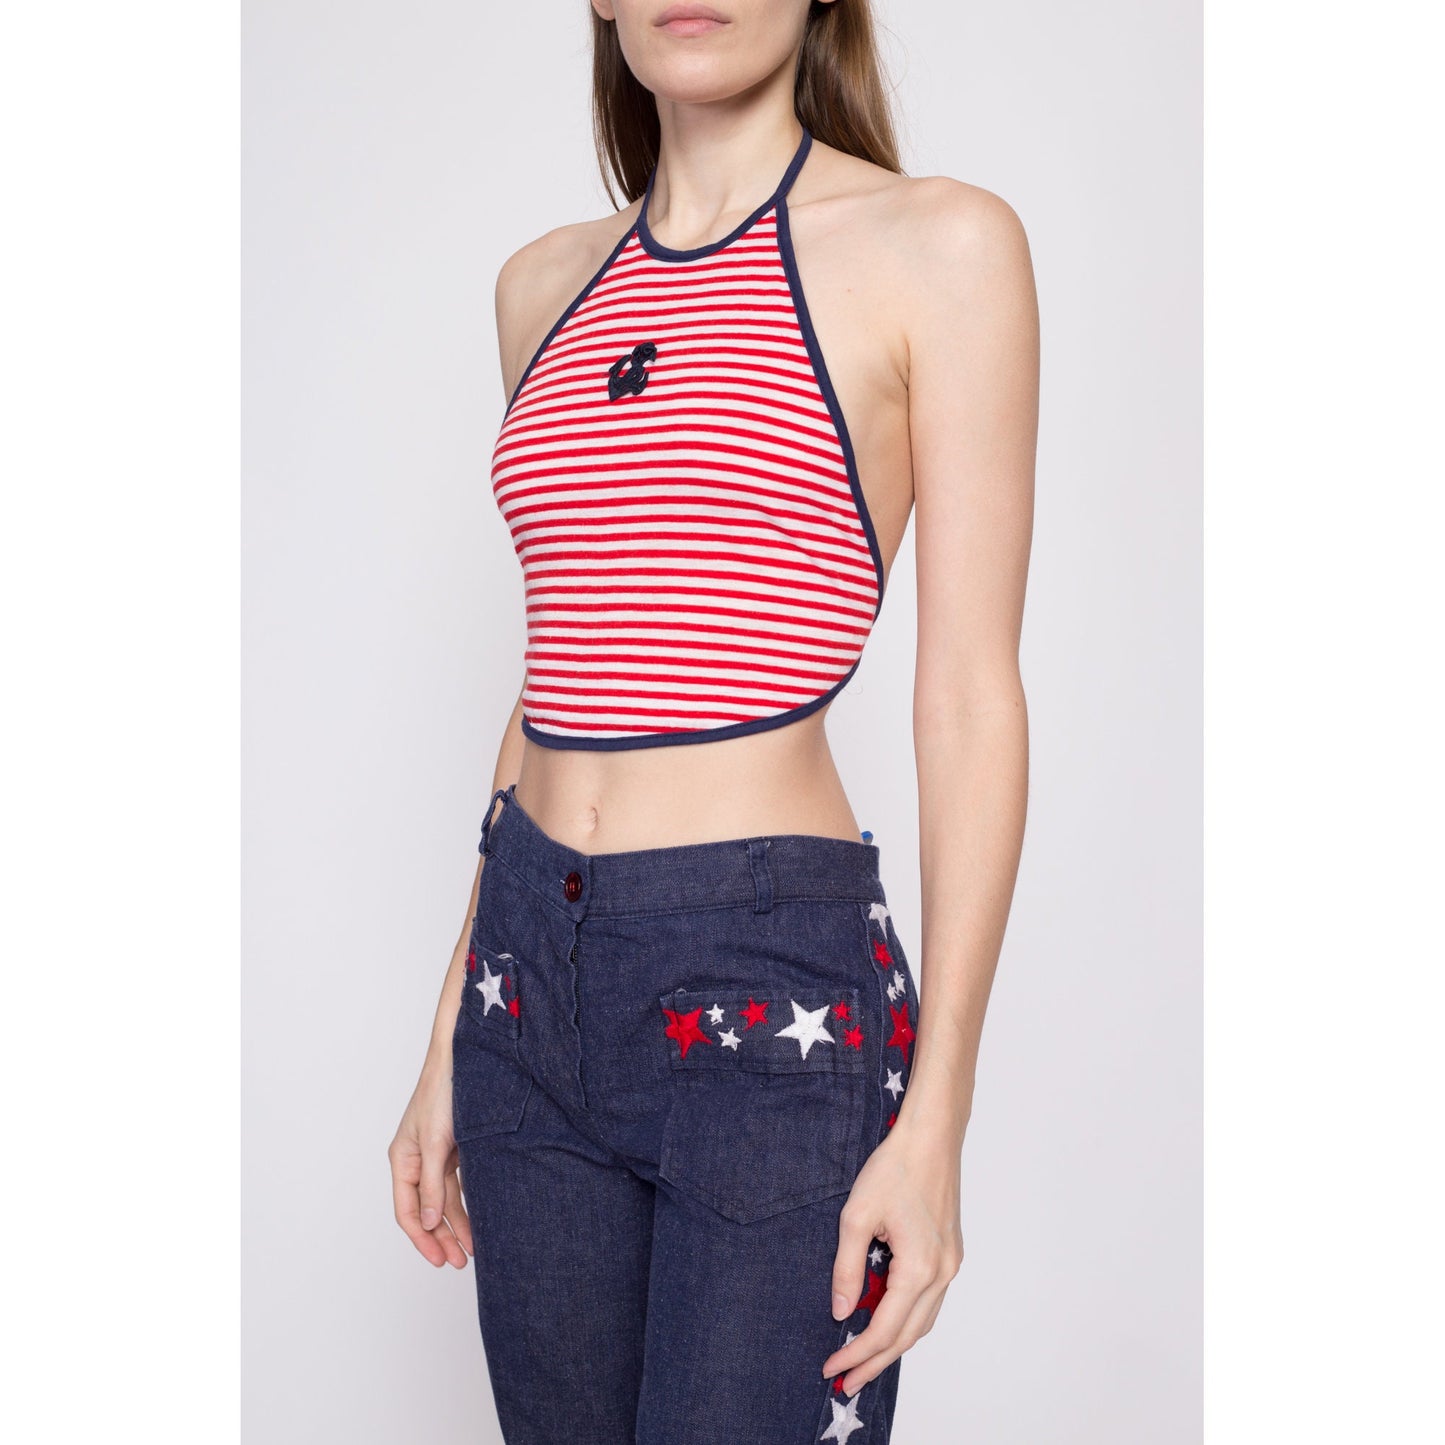 70s Nautical Striped Backless Halter Crop Top - Small | Vintage Anchor Applique Cropped Summer Shirt